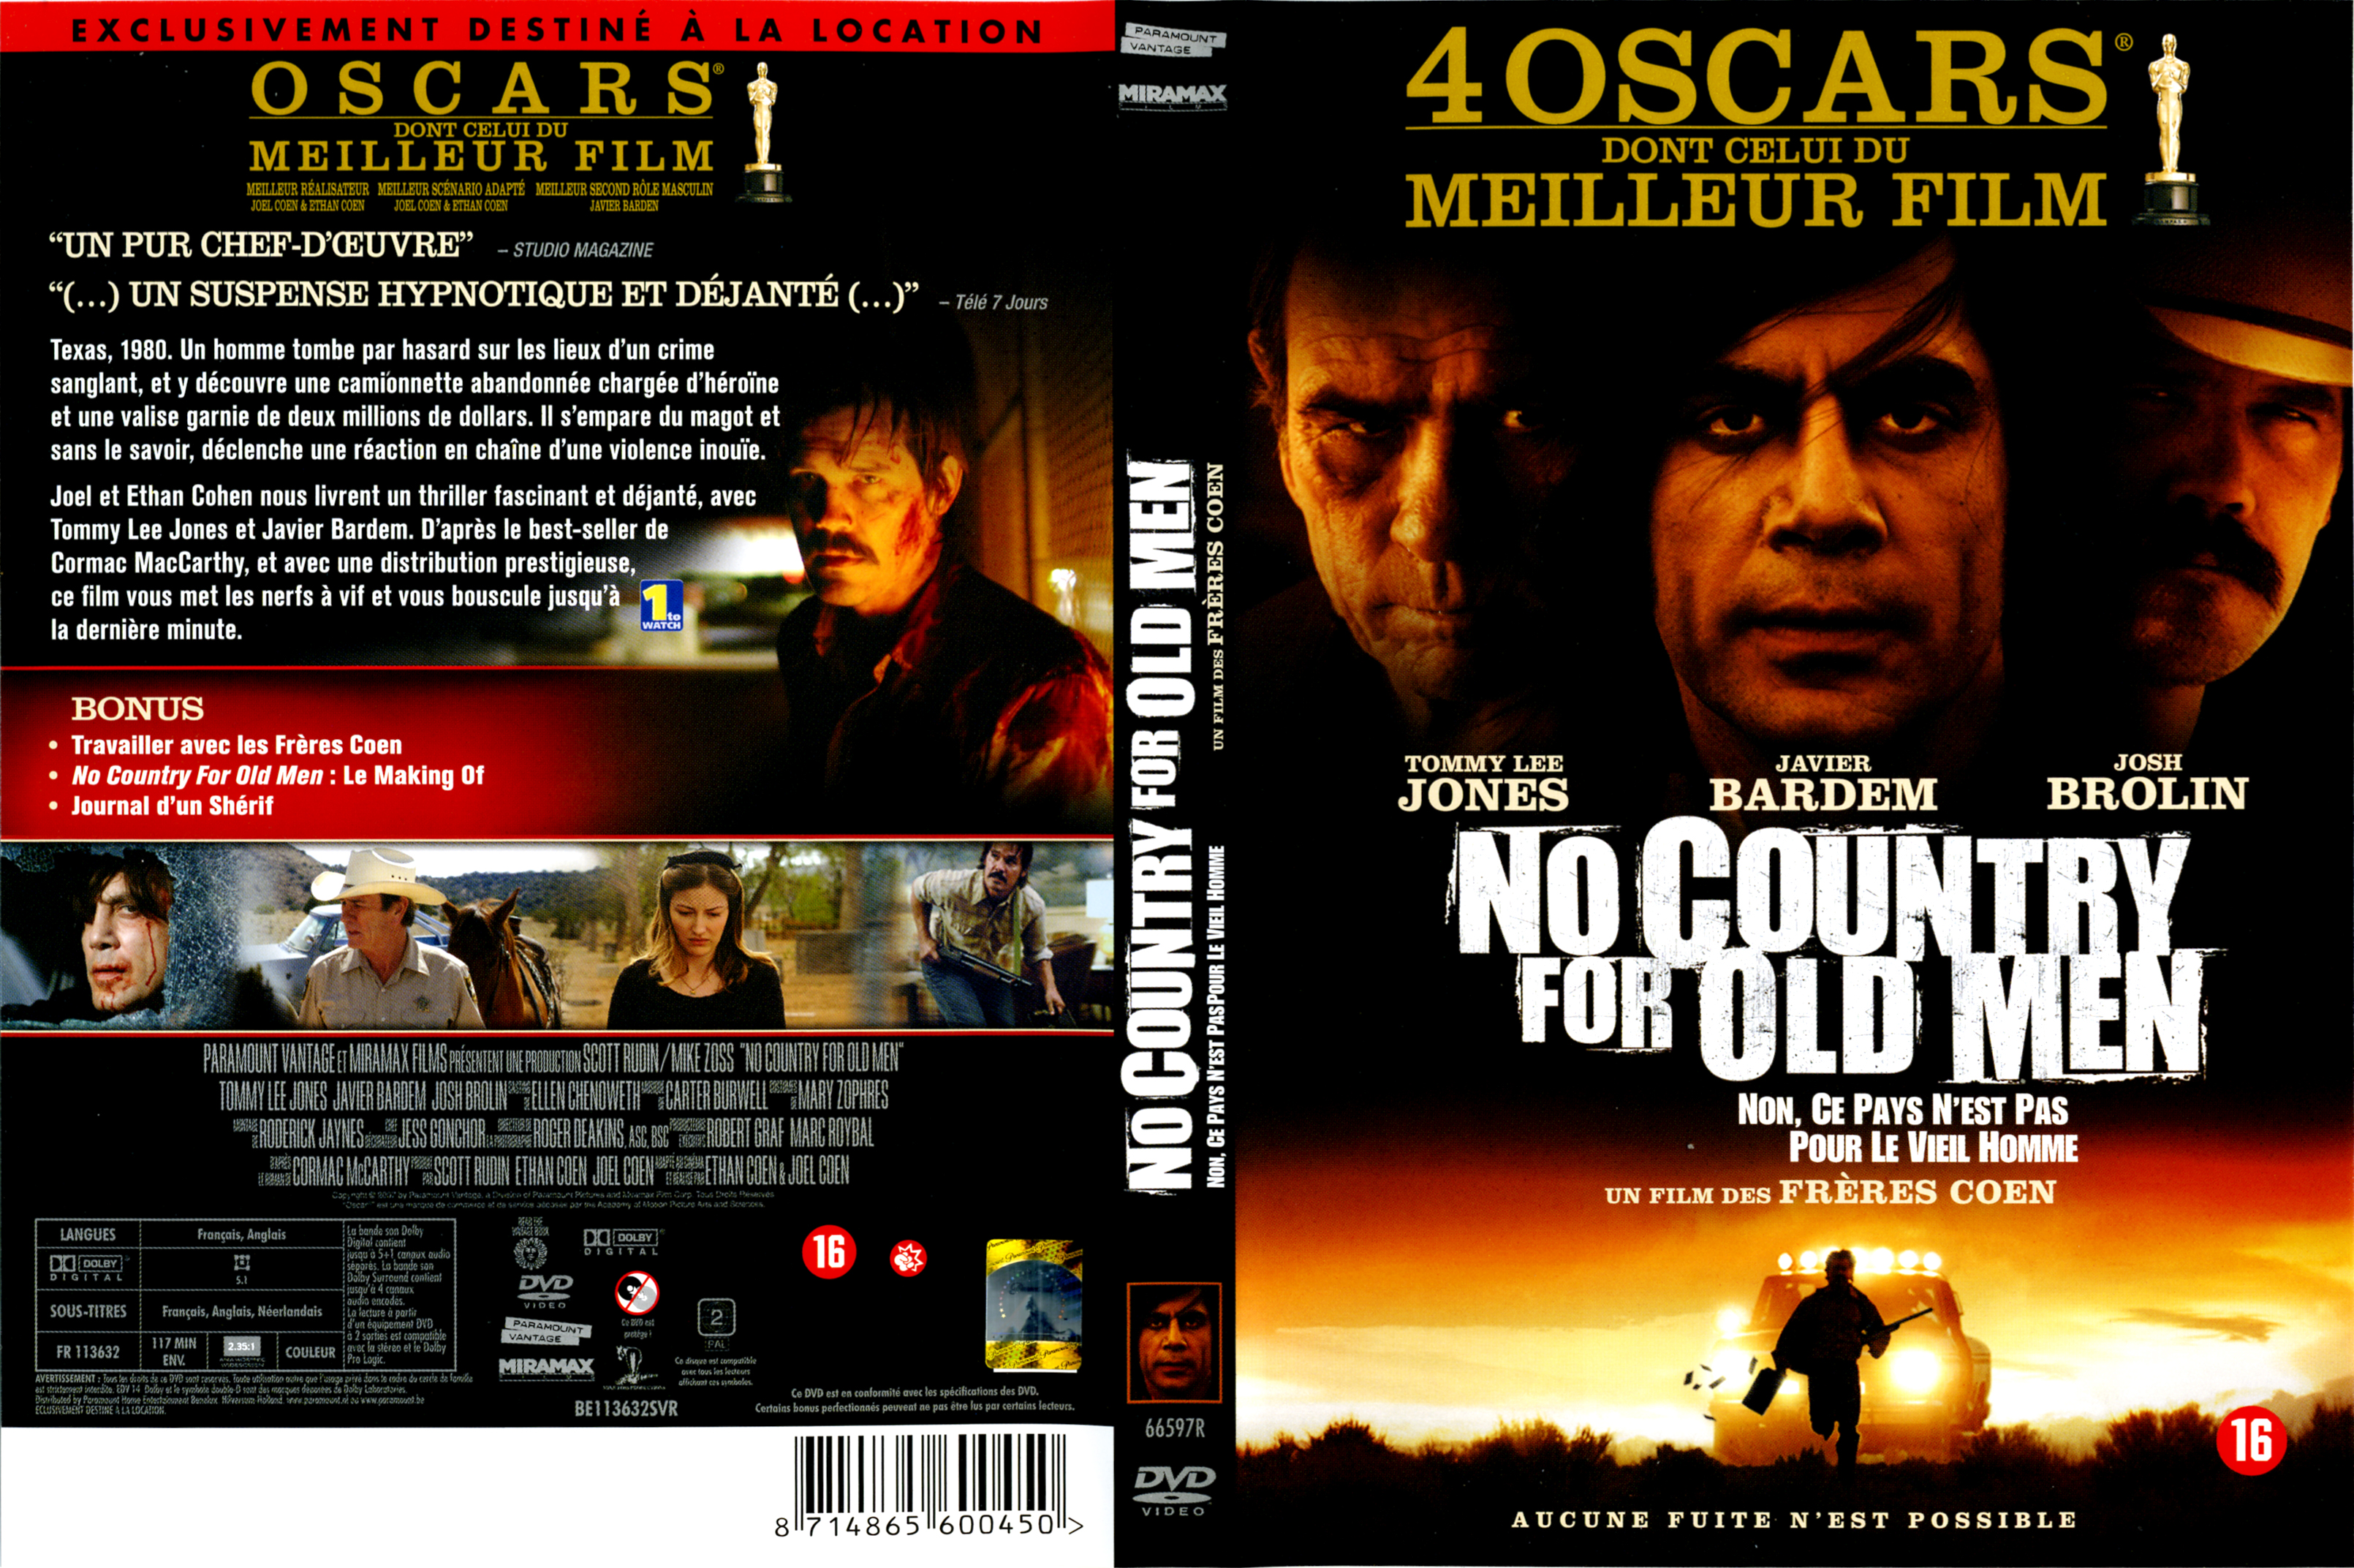 Jaquette DVD No country for old men